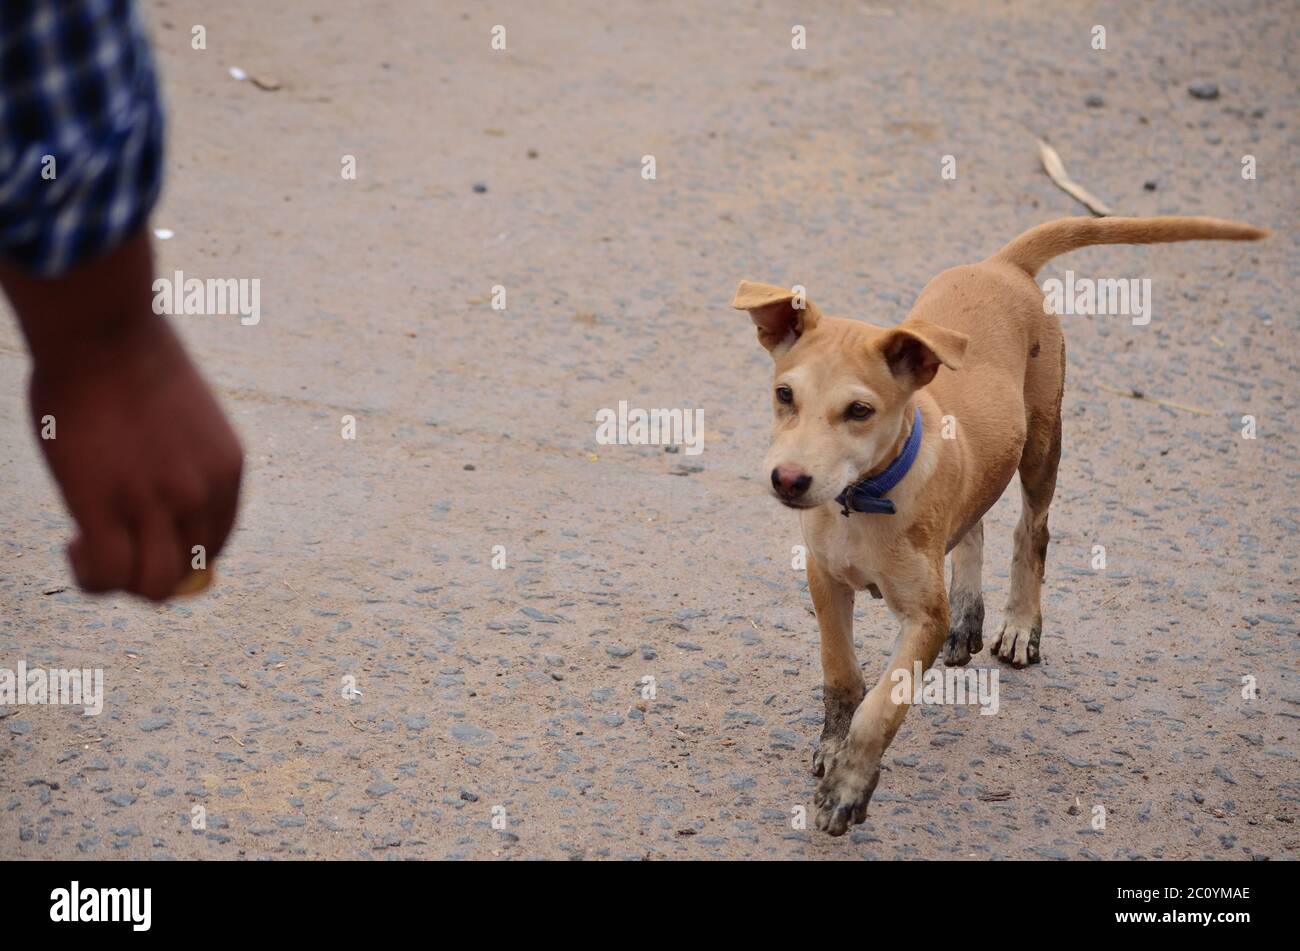 A small country side dog pet coming for treat Stock Photo